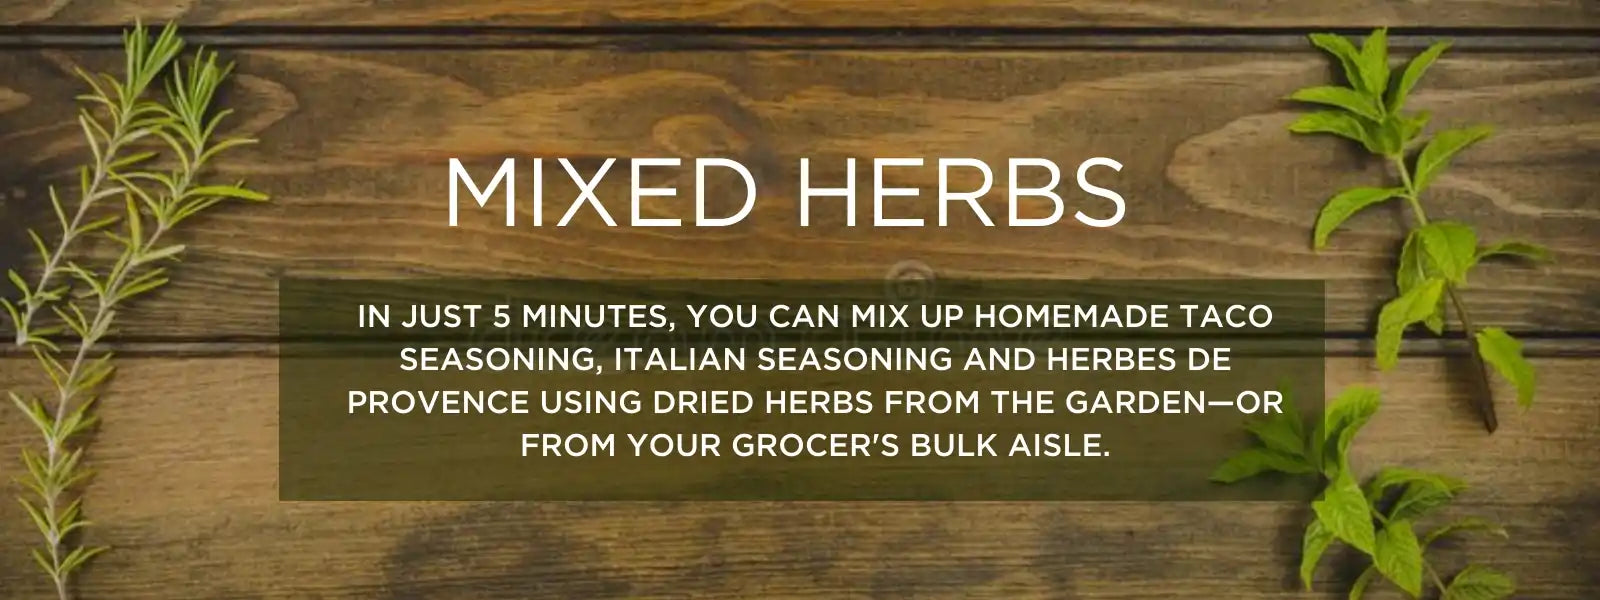 Mixed Herbs- Health Benefits, Uses and Important Facts